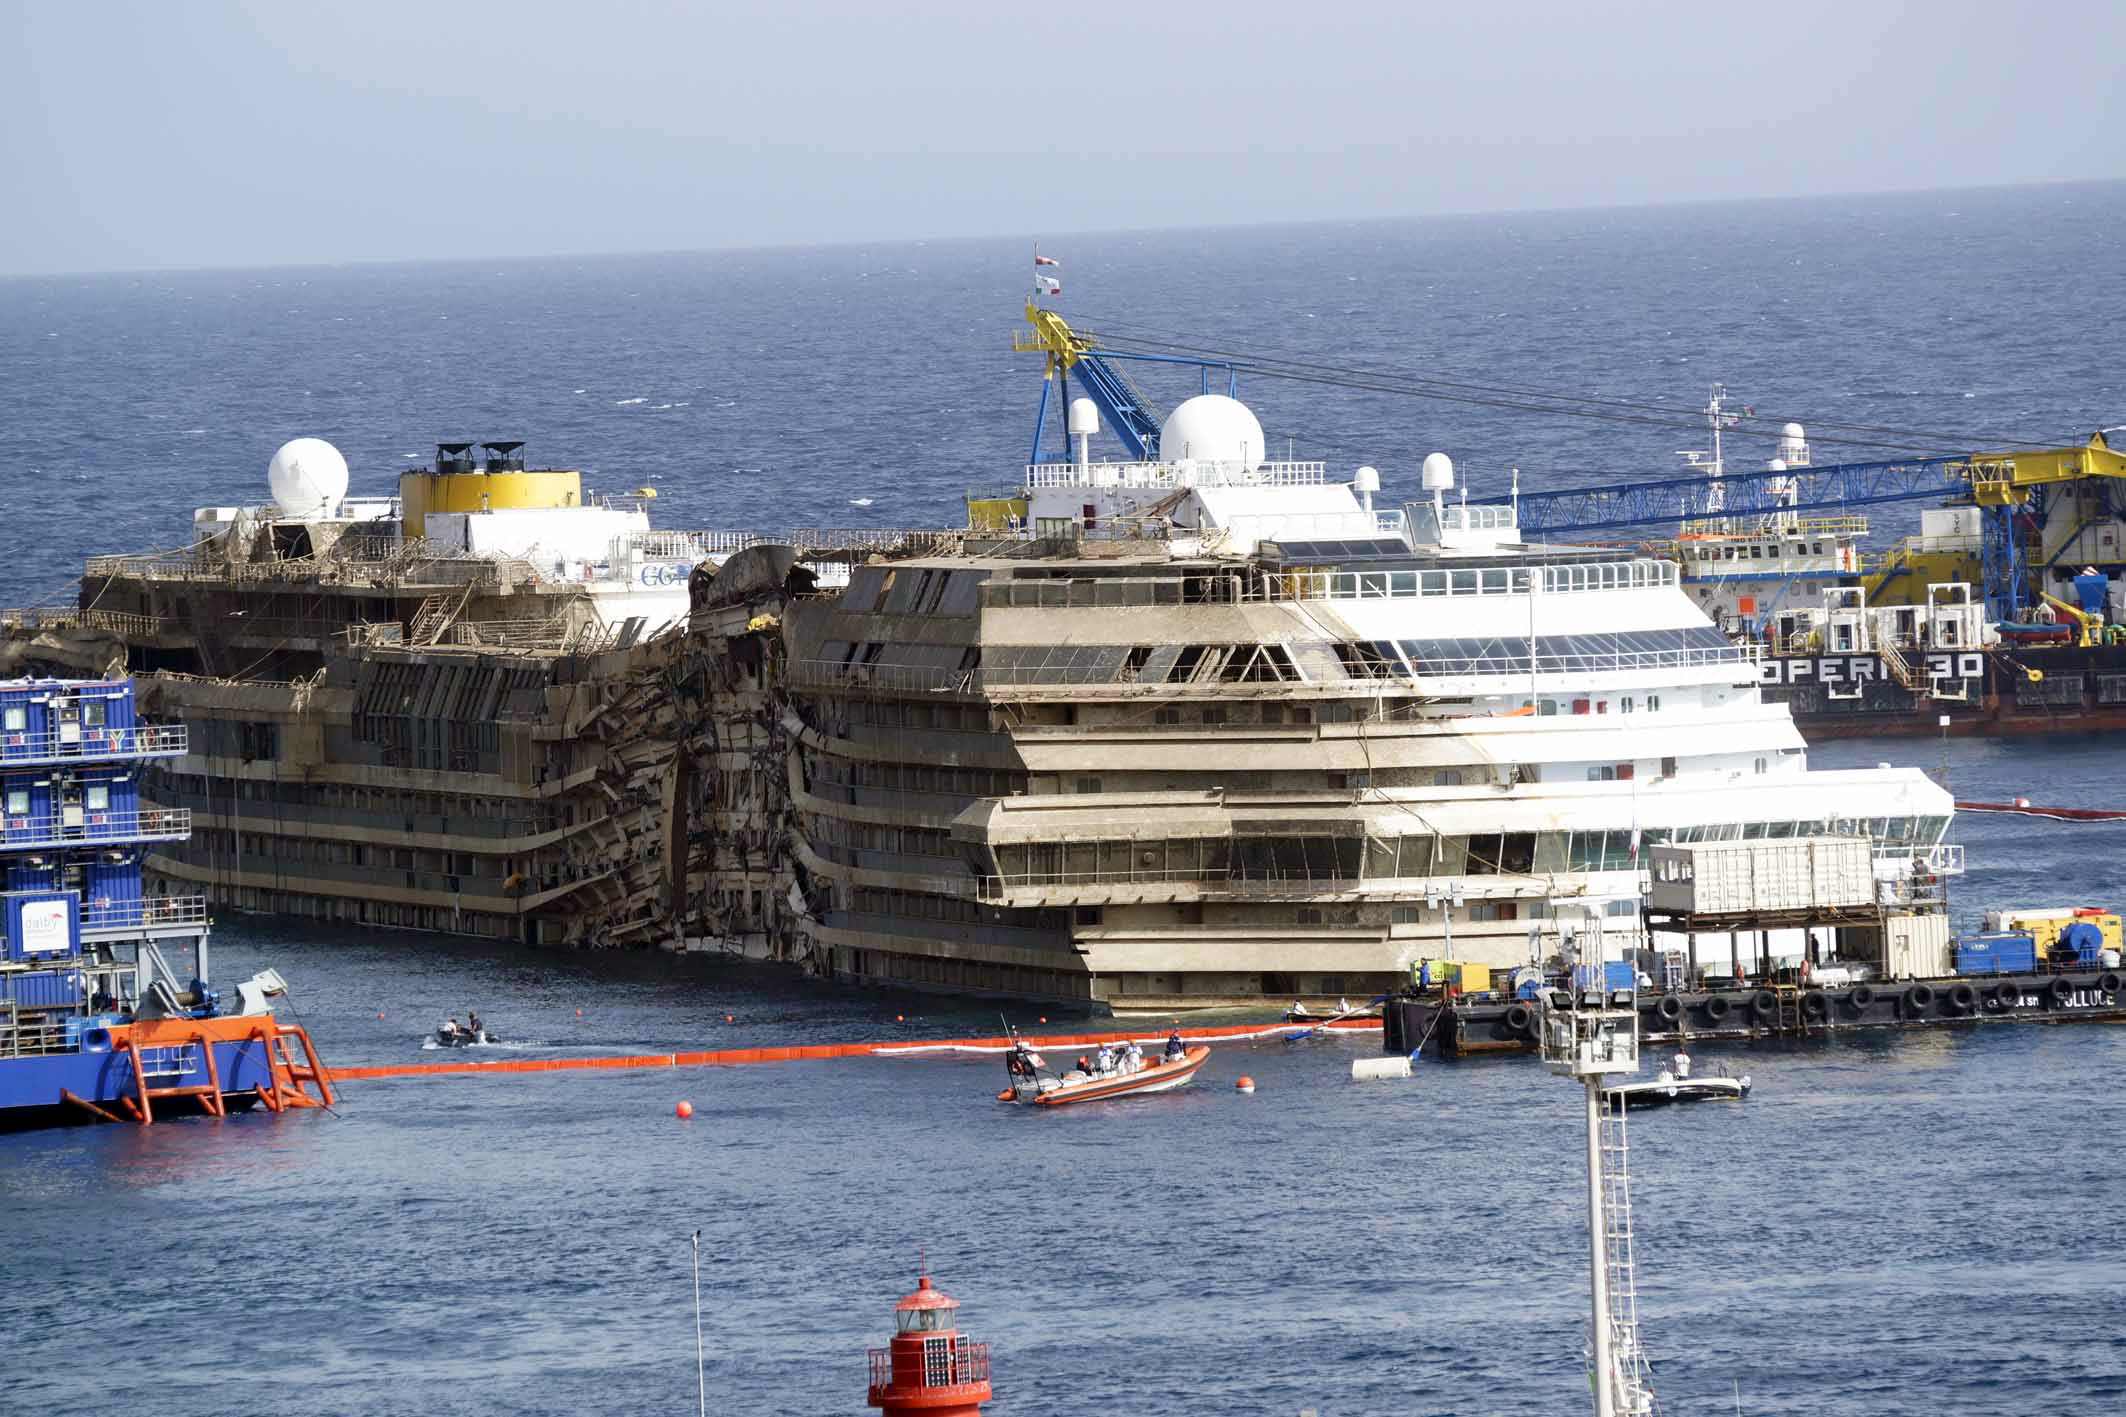 The Costa Concordia ship is seen after it was lifted upright, on the Tuscan Island of Giglio, Italy, on Tuesday morning.